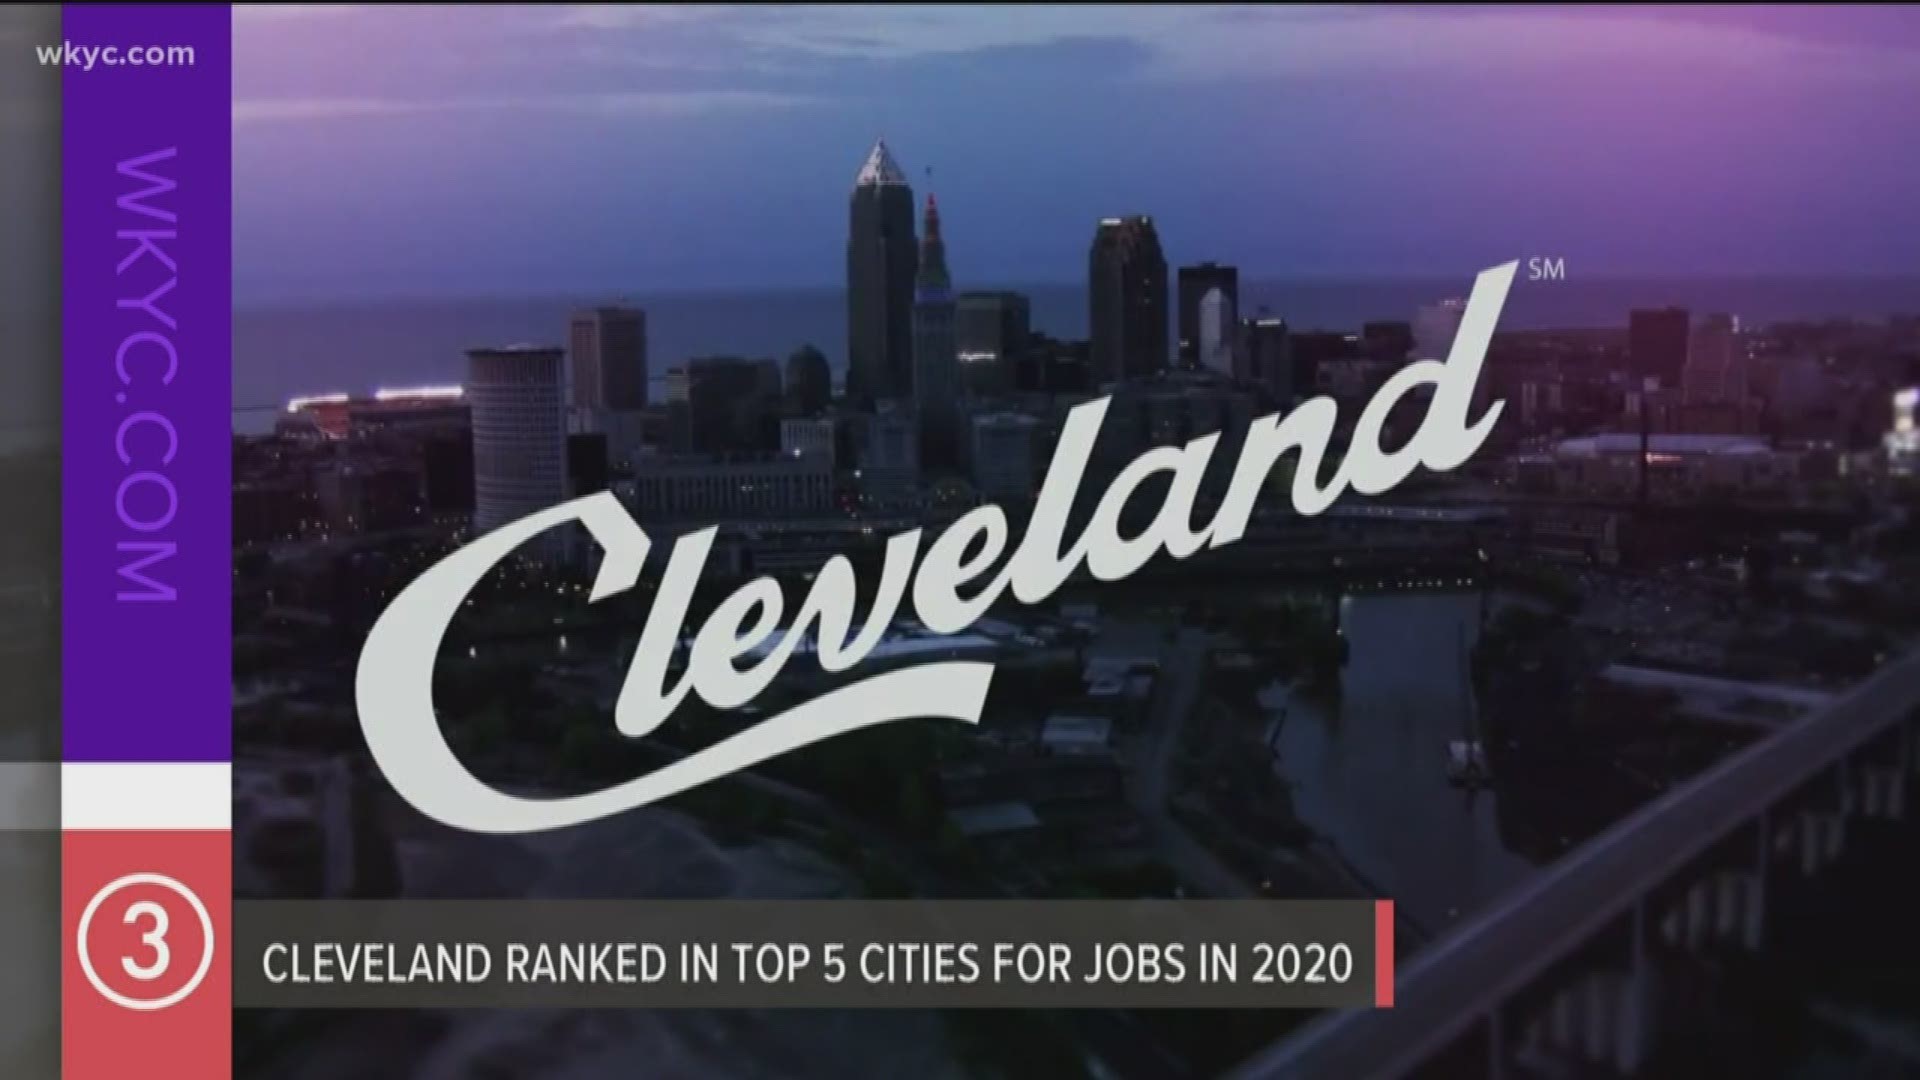 If you’re looking for a new job, Cleveland is a great place to be. Glassdoor, a job and recruiting site, said Cleveland ranks #5 overall based on three key factors.